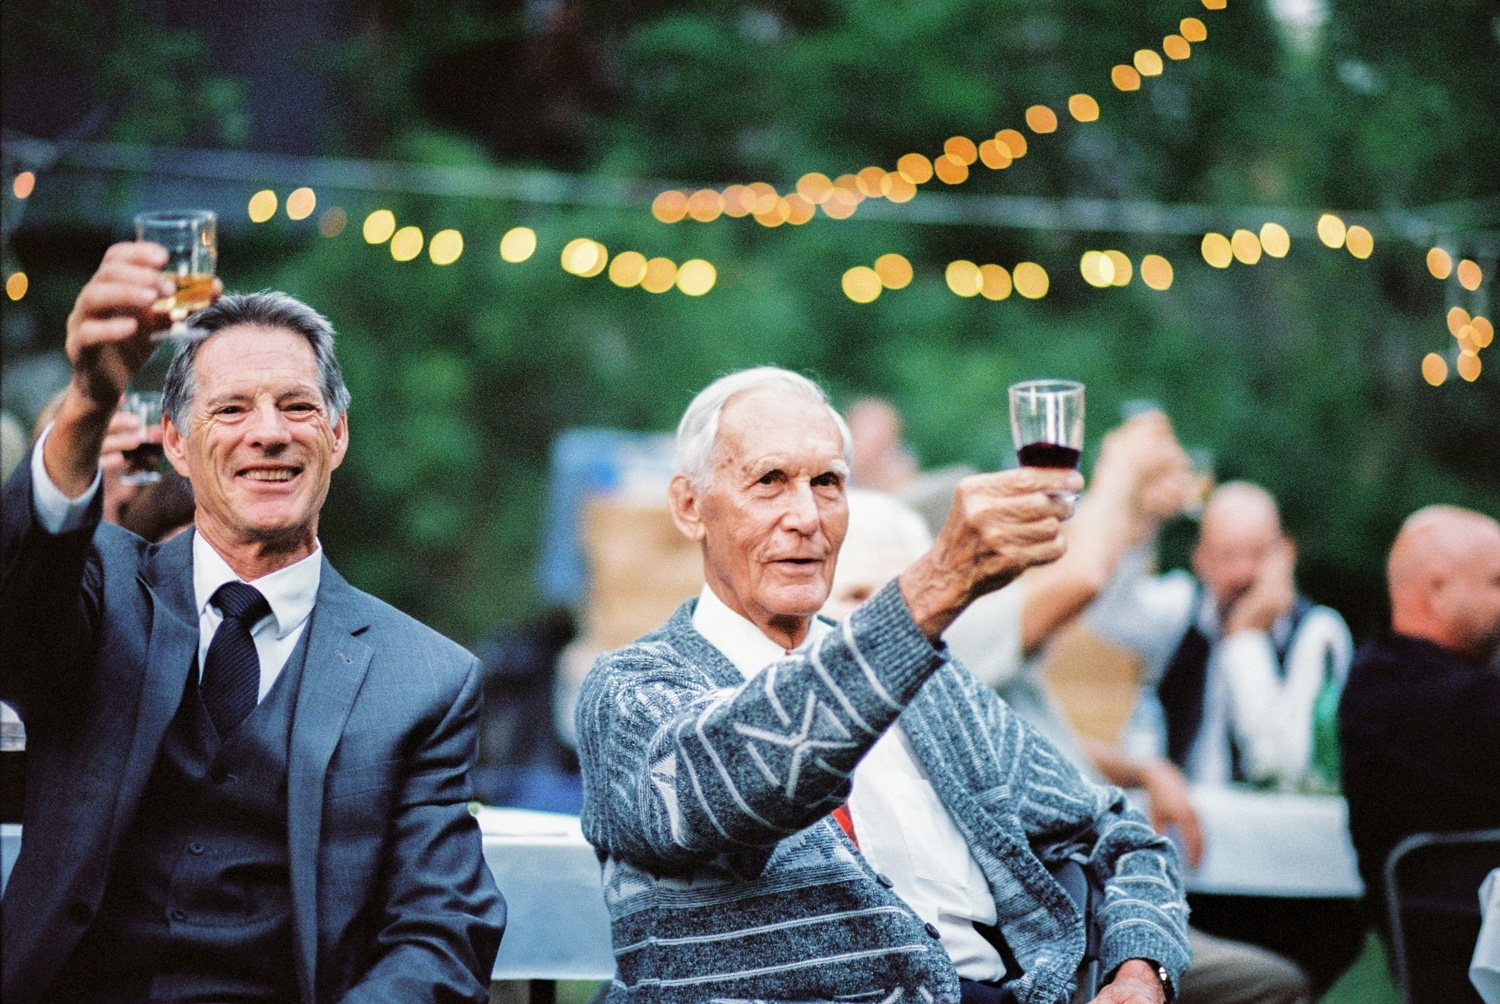 wedding-guests-toasting-the-bride-and-groom.jpg